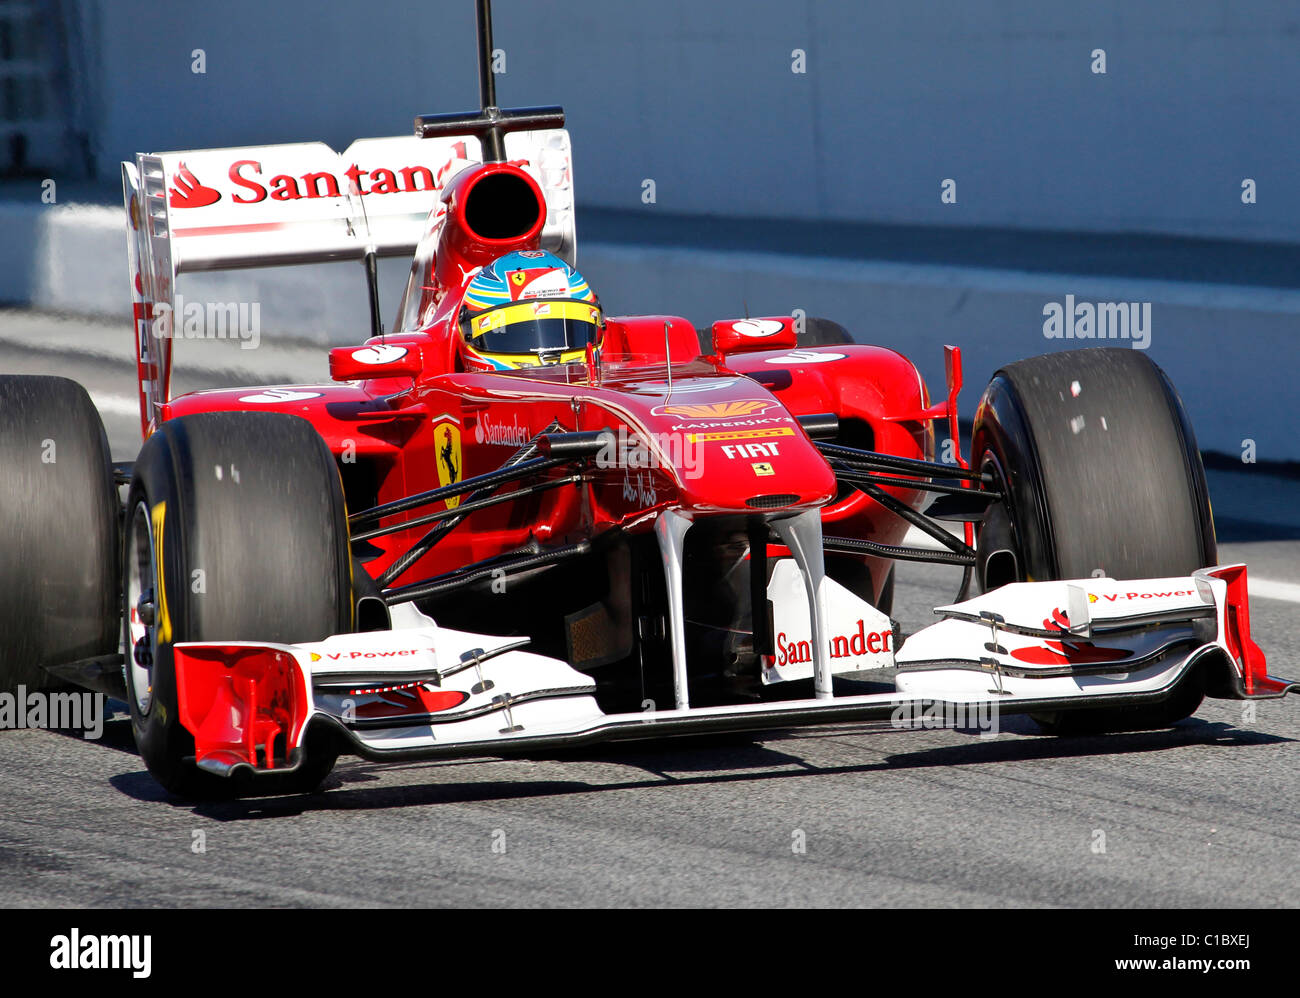 Fernando Alonso driving the 2011 Ferrari at the Montmelo circuit test  session near Barcelona, February 2011 Stock Photo - Alamy